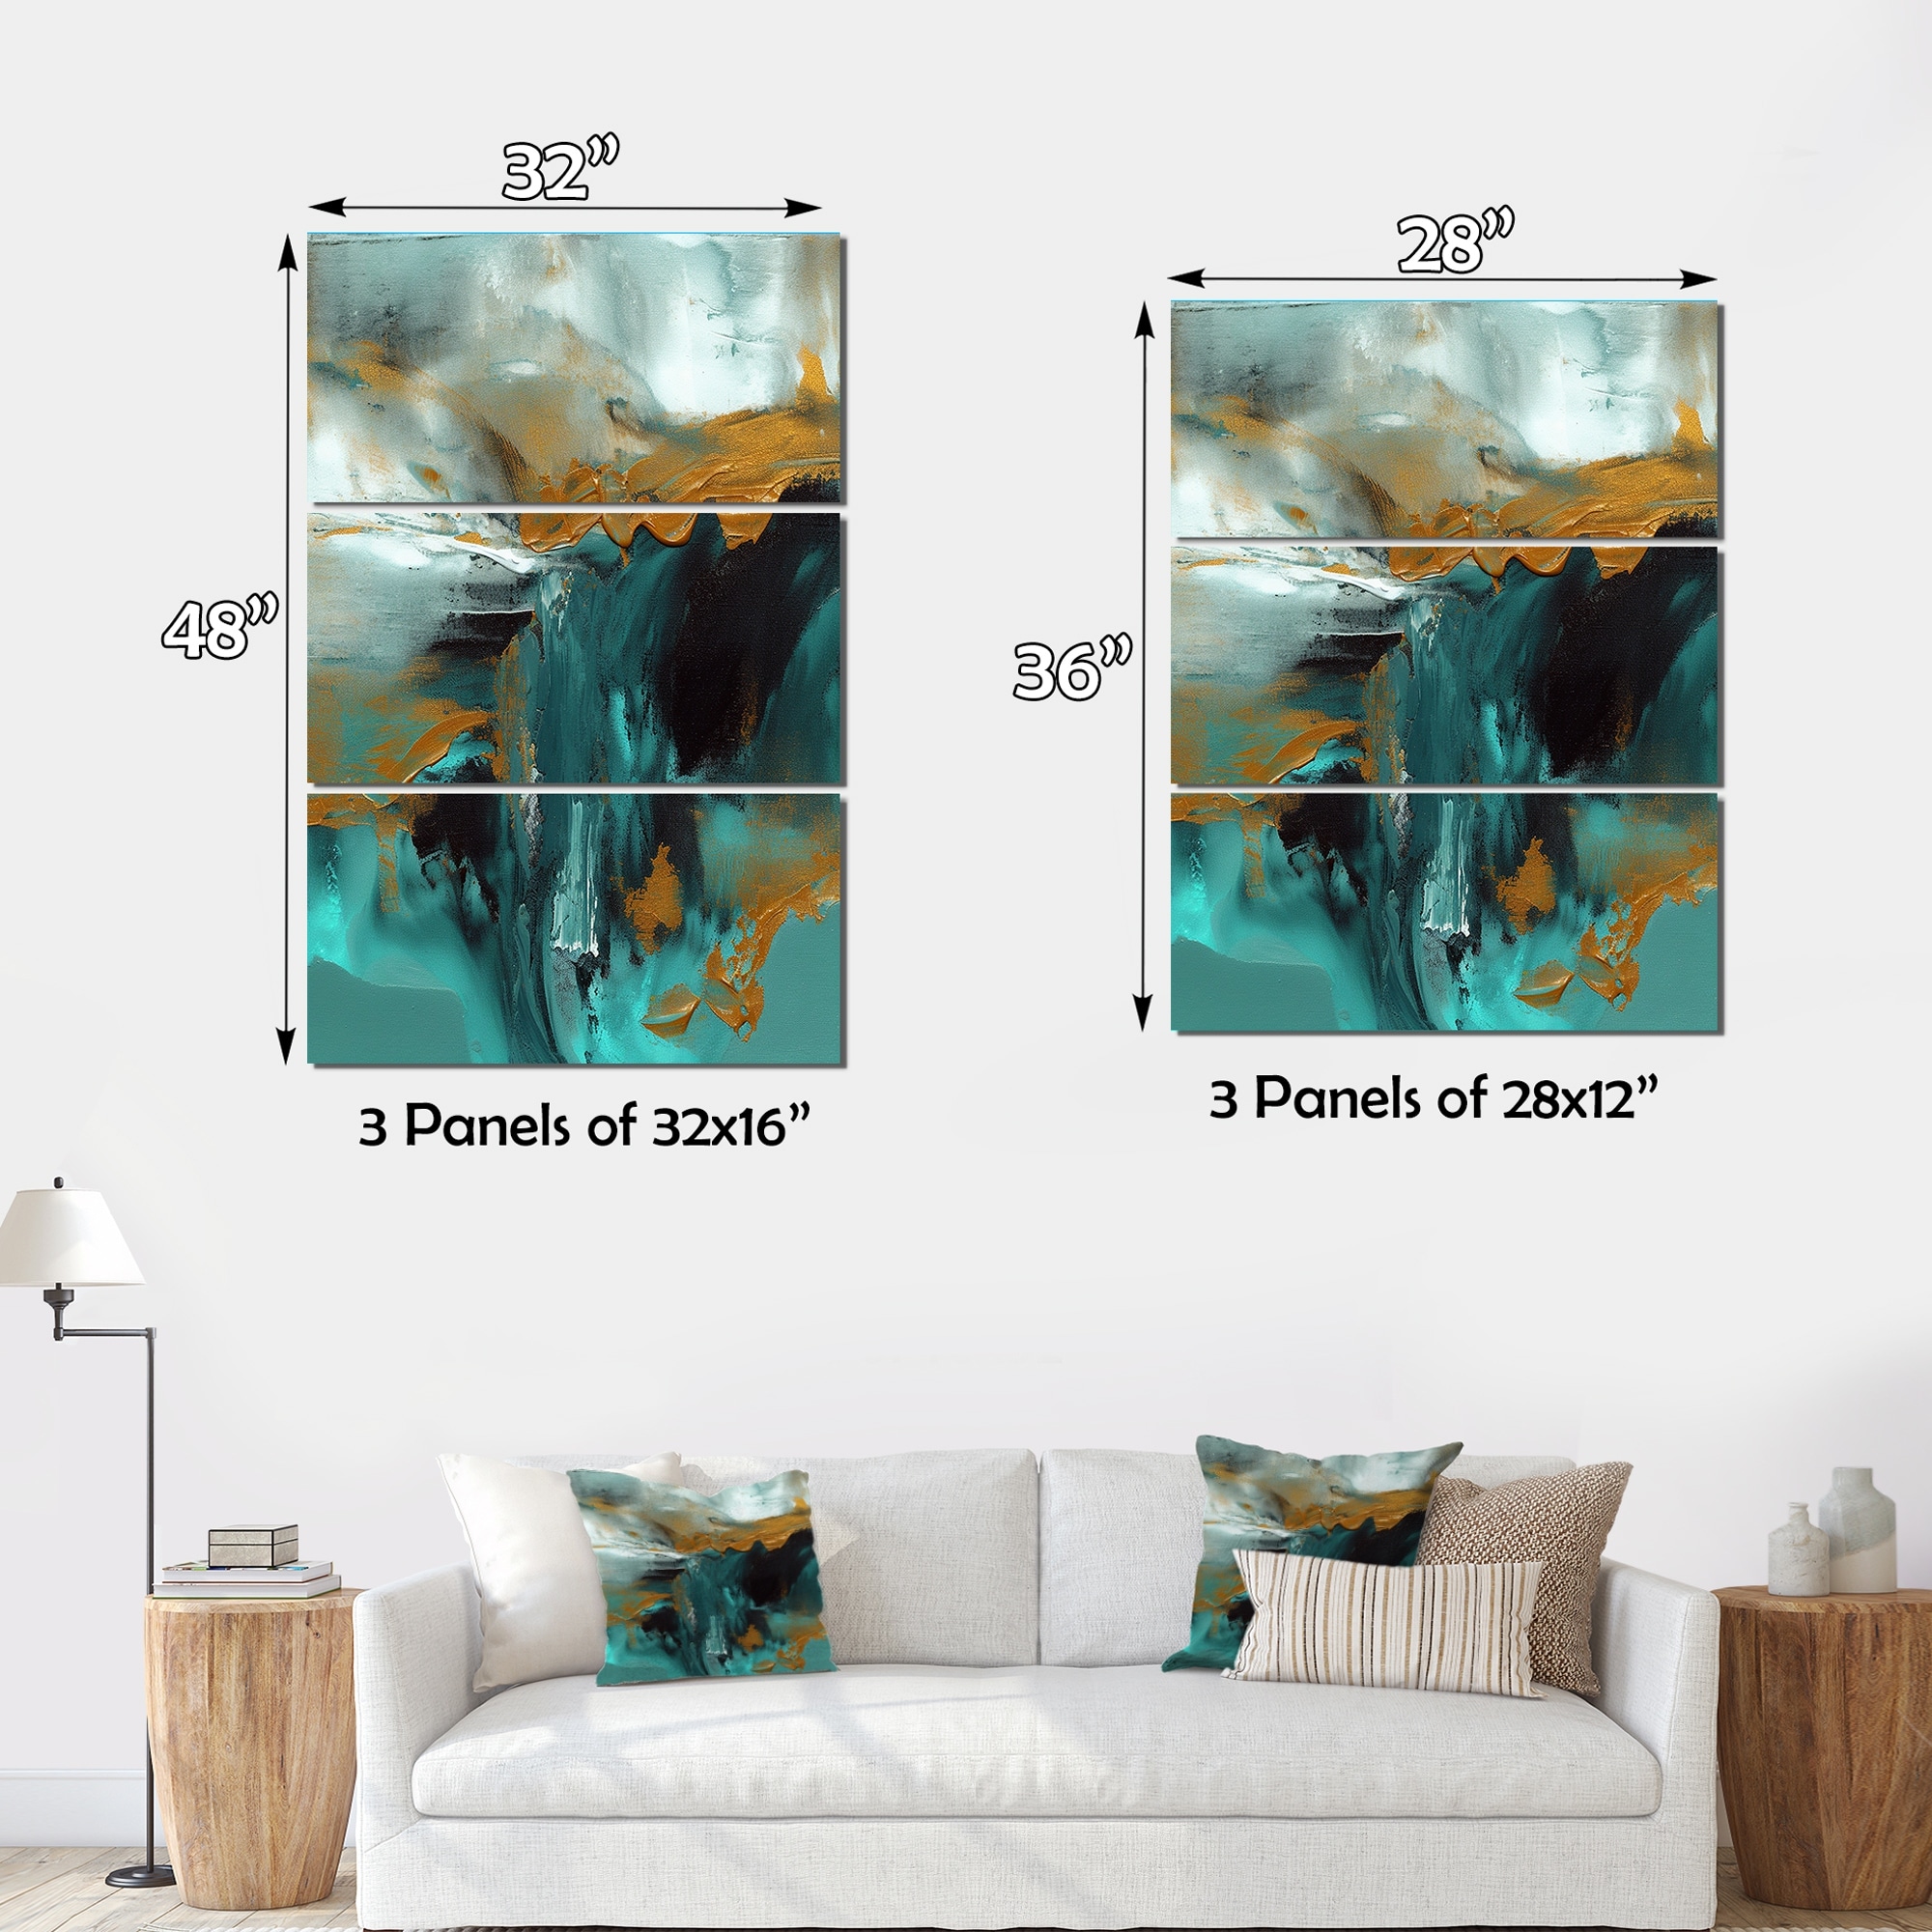 https://ak1.ostkcdn.com/images/products/is/images/direct/cf404c40aa305f2728221fc8524b8dc84523ae0c/Designart-%22Teal-Balance-III%22-Abstract-Painting-Canvas-Art-Print---3-Panels.jpg